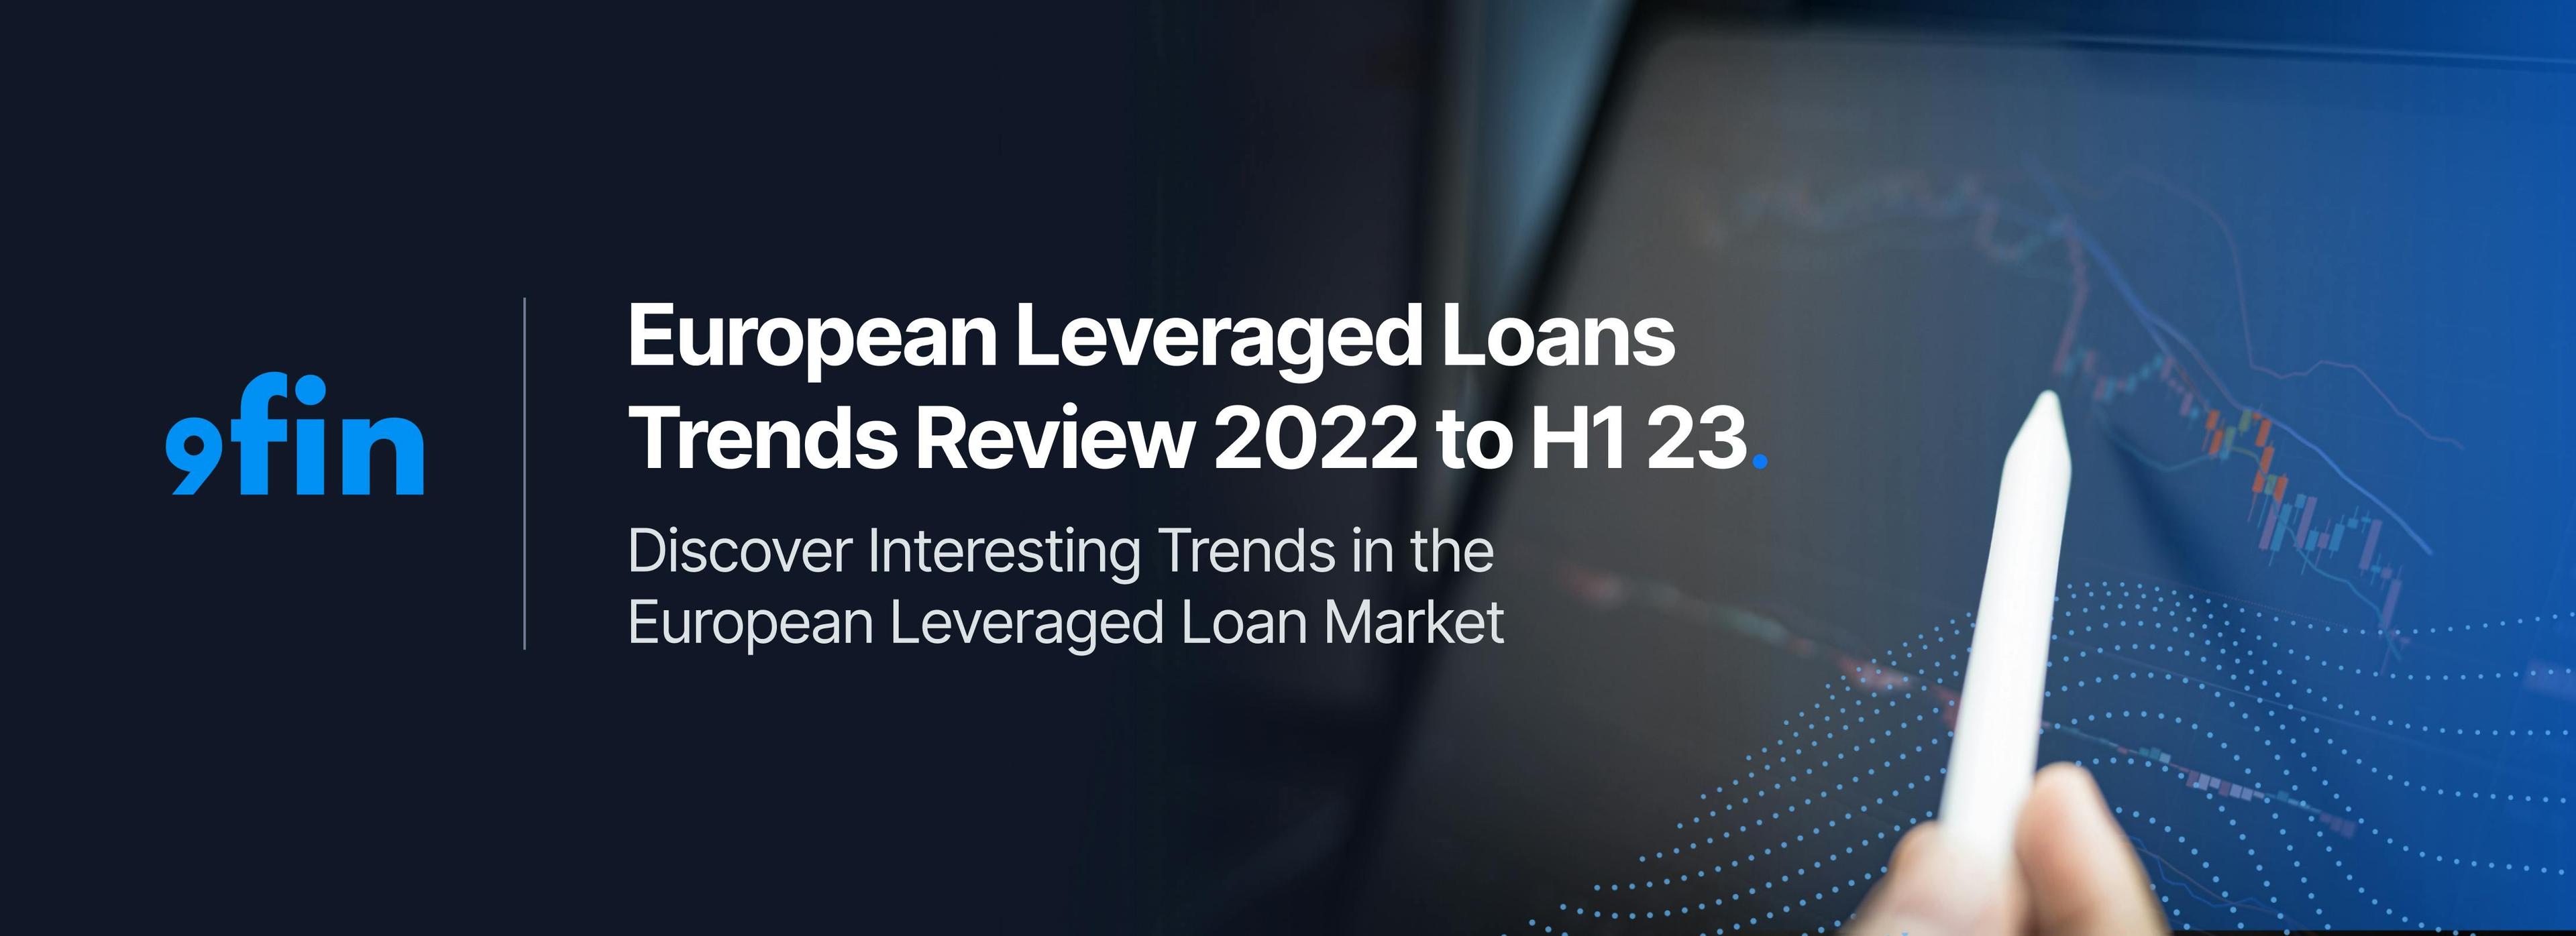 European Leveraged Loans Trends Review 2022 to H1 23